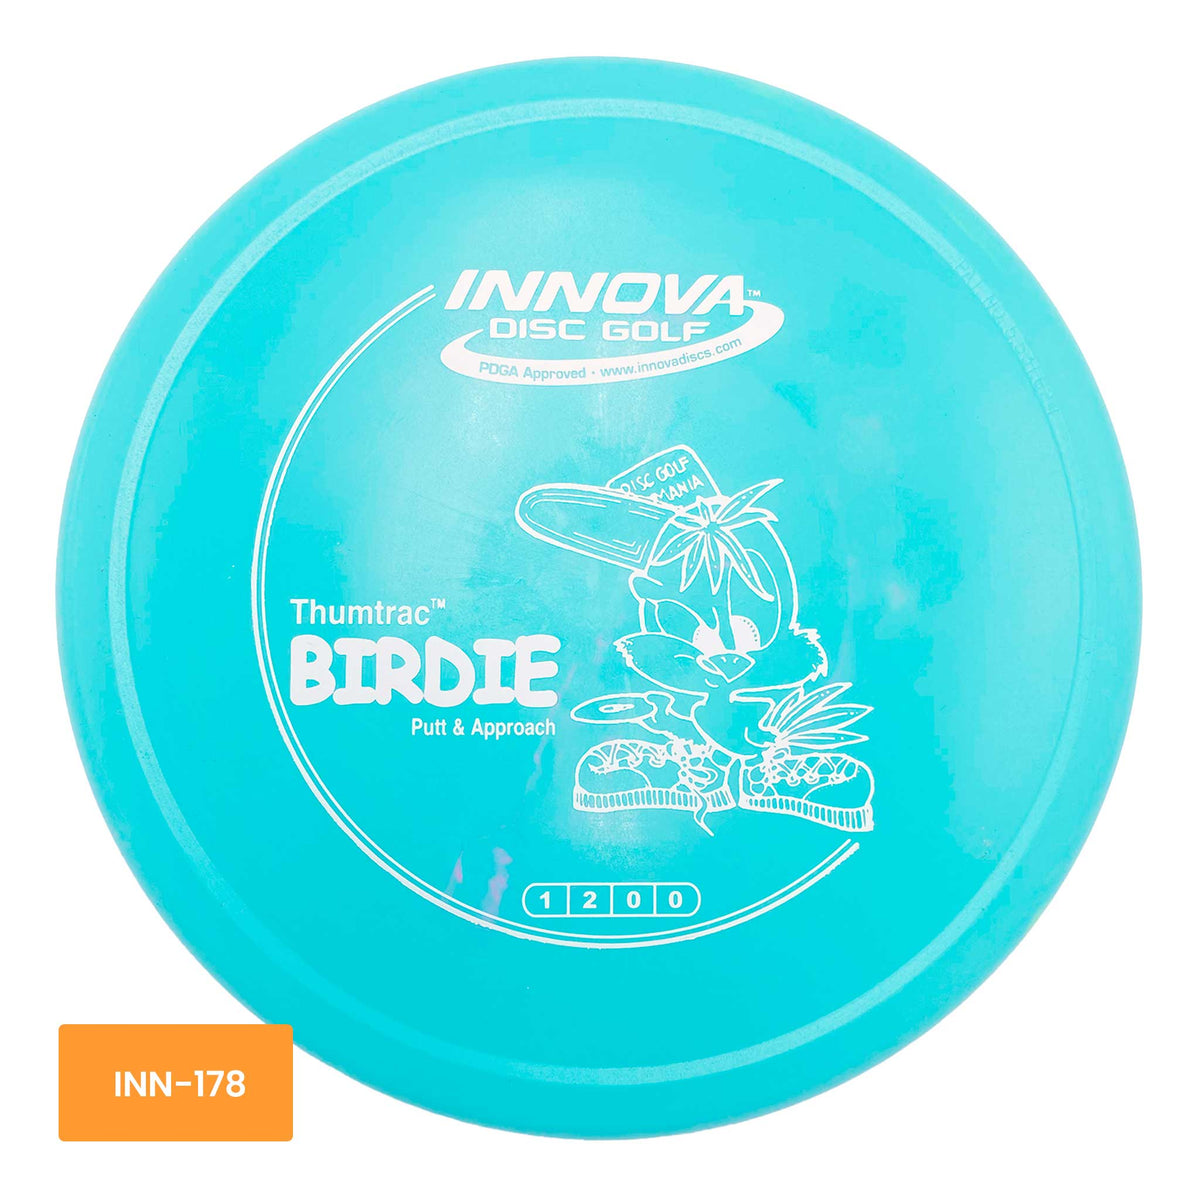 Innova Disc Golf DX Birdie putter and approach - Teal / White